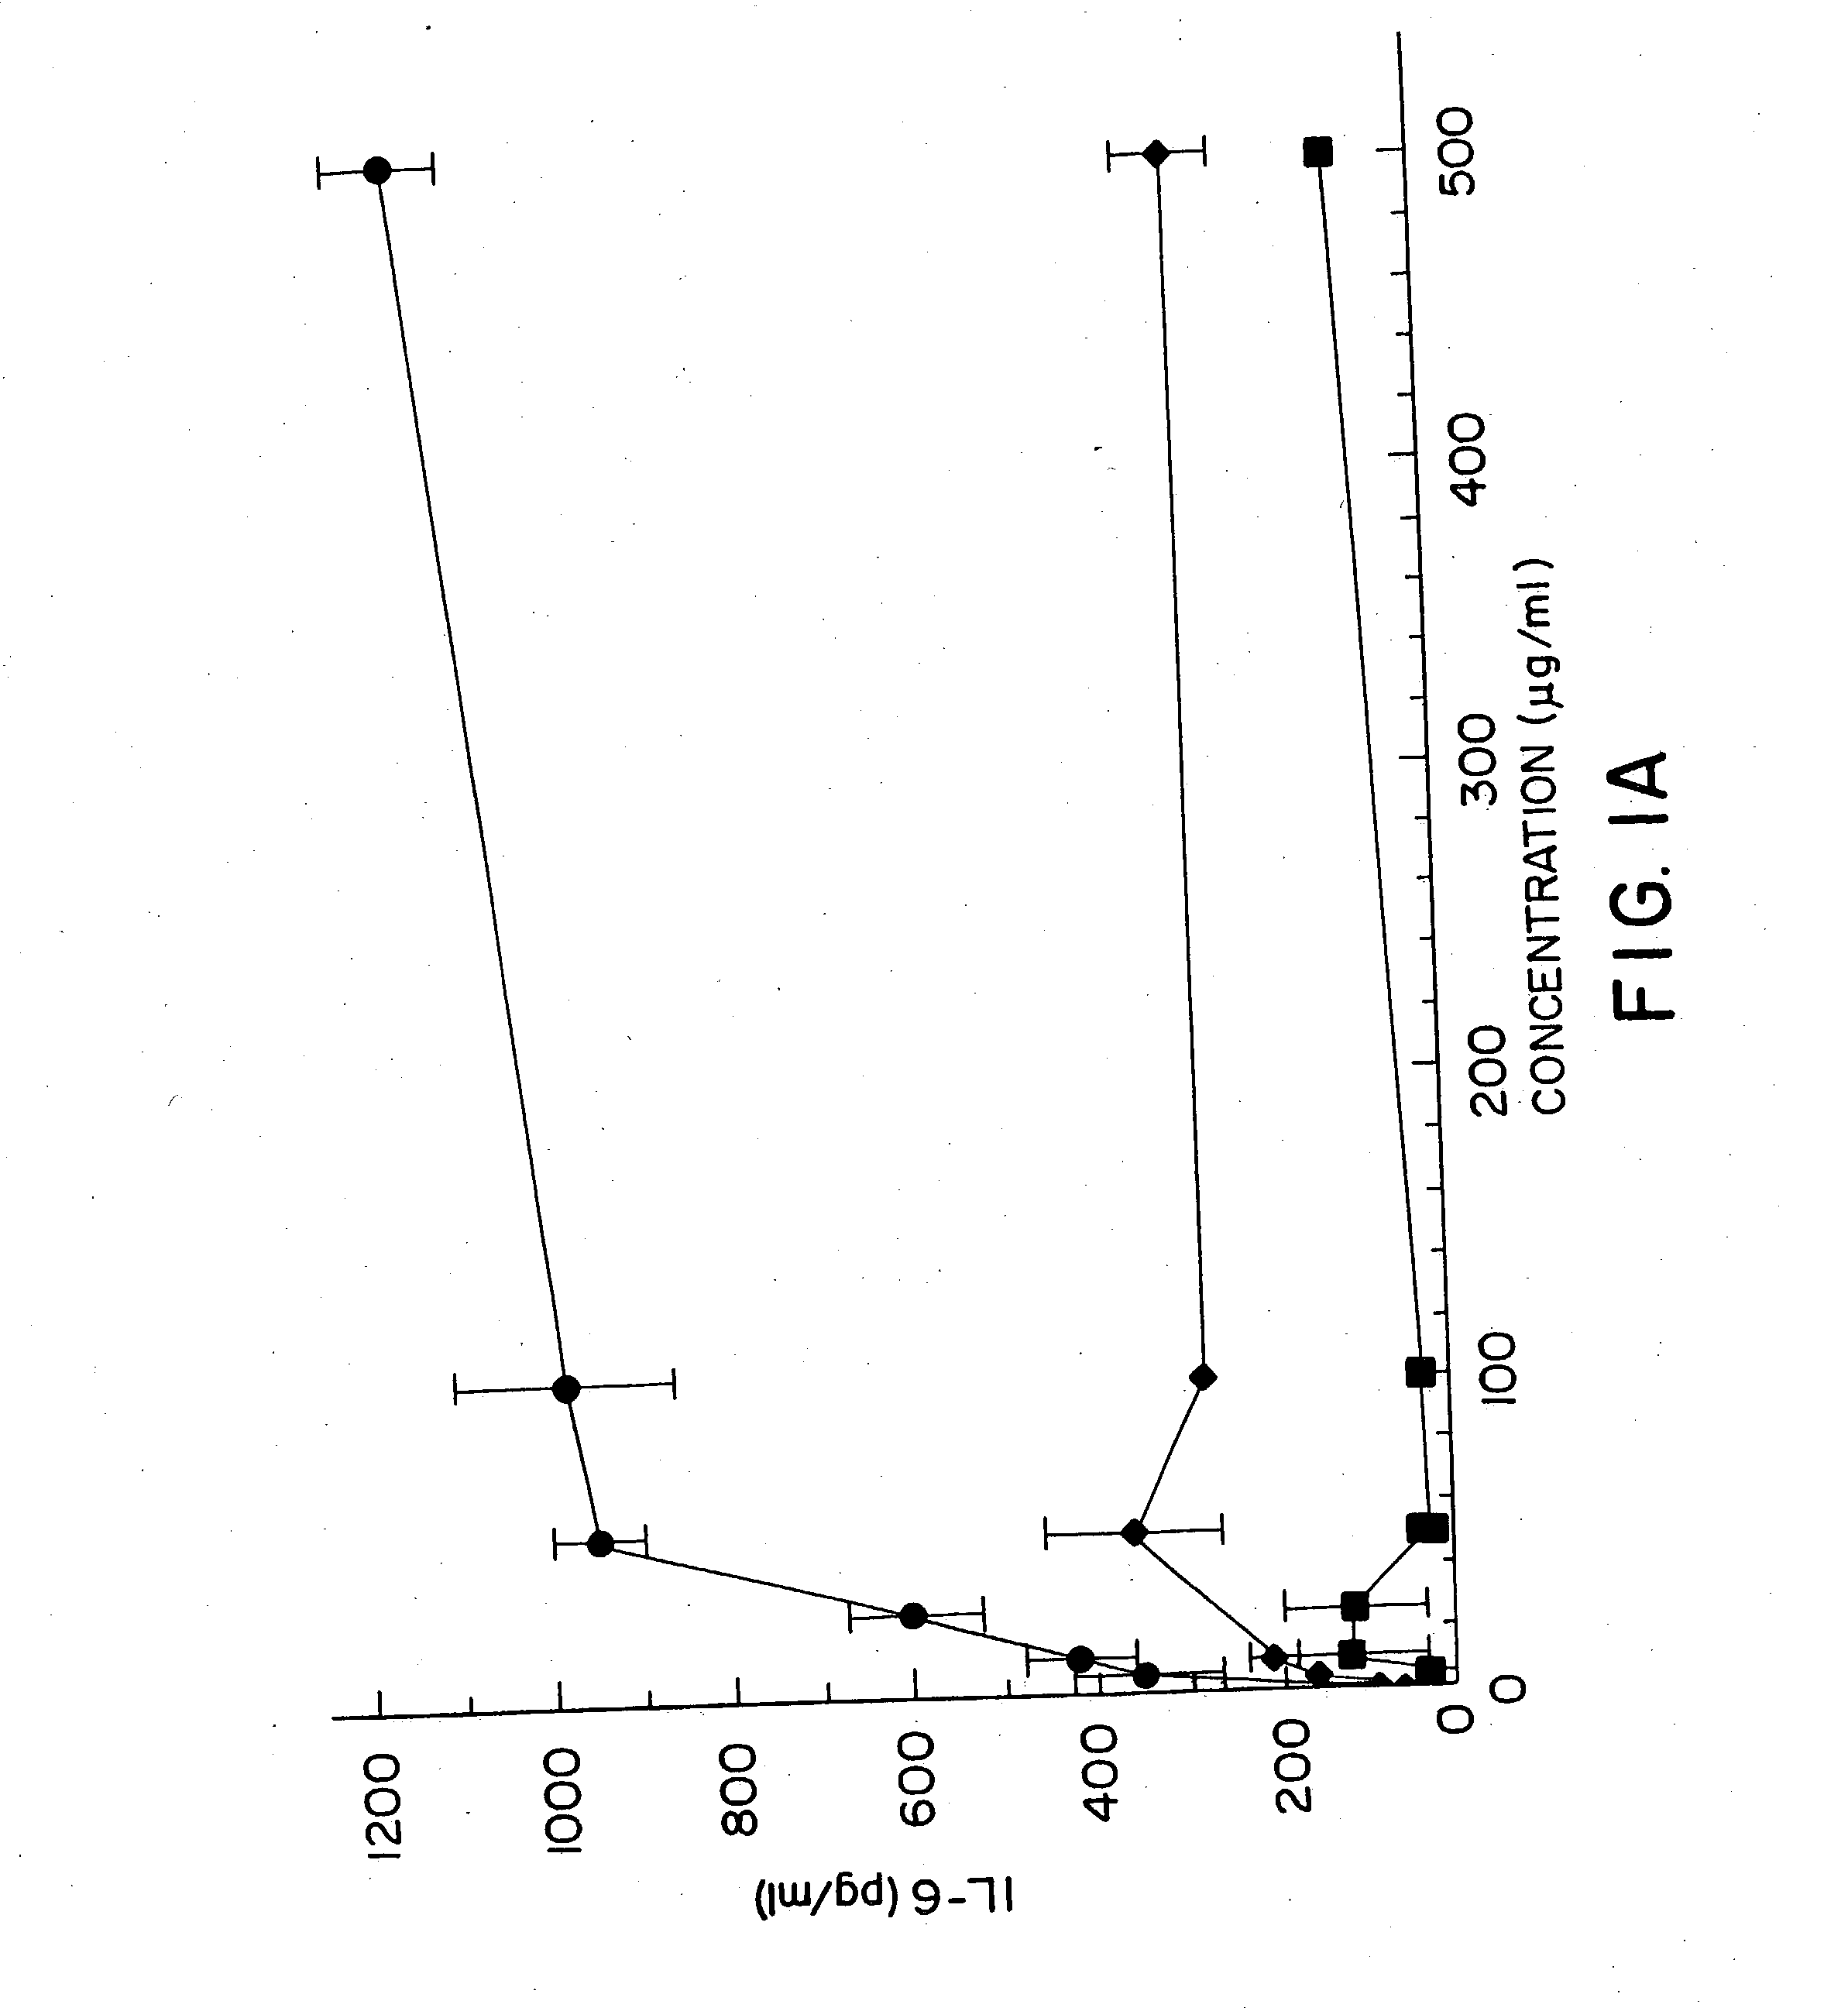 Methods for treating and preventing infectious disease